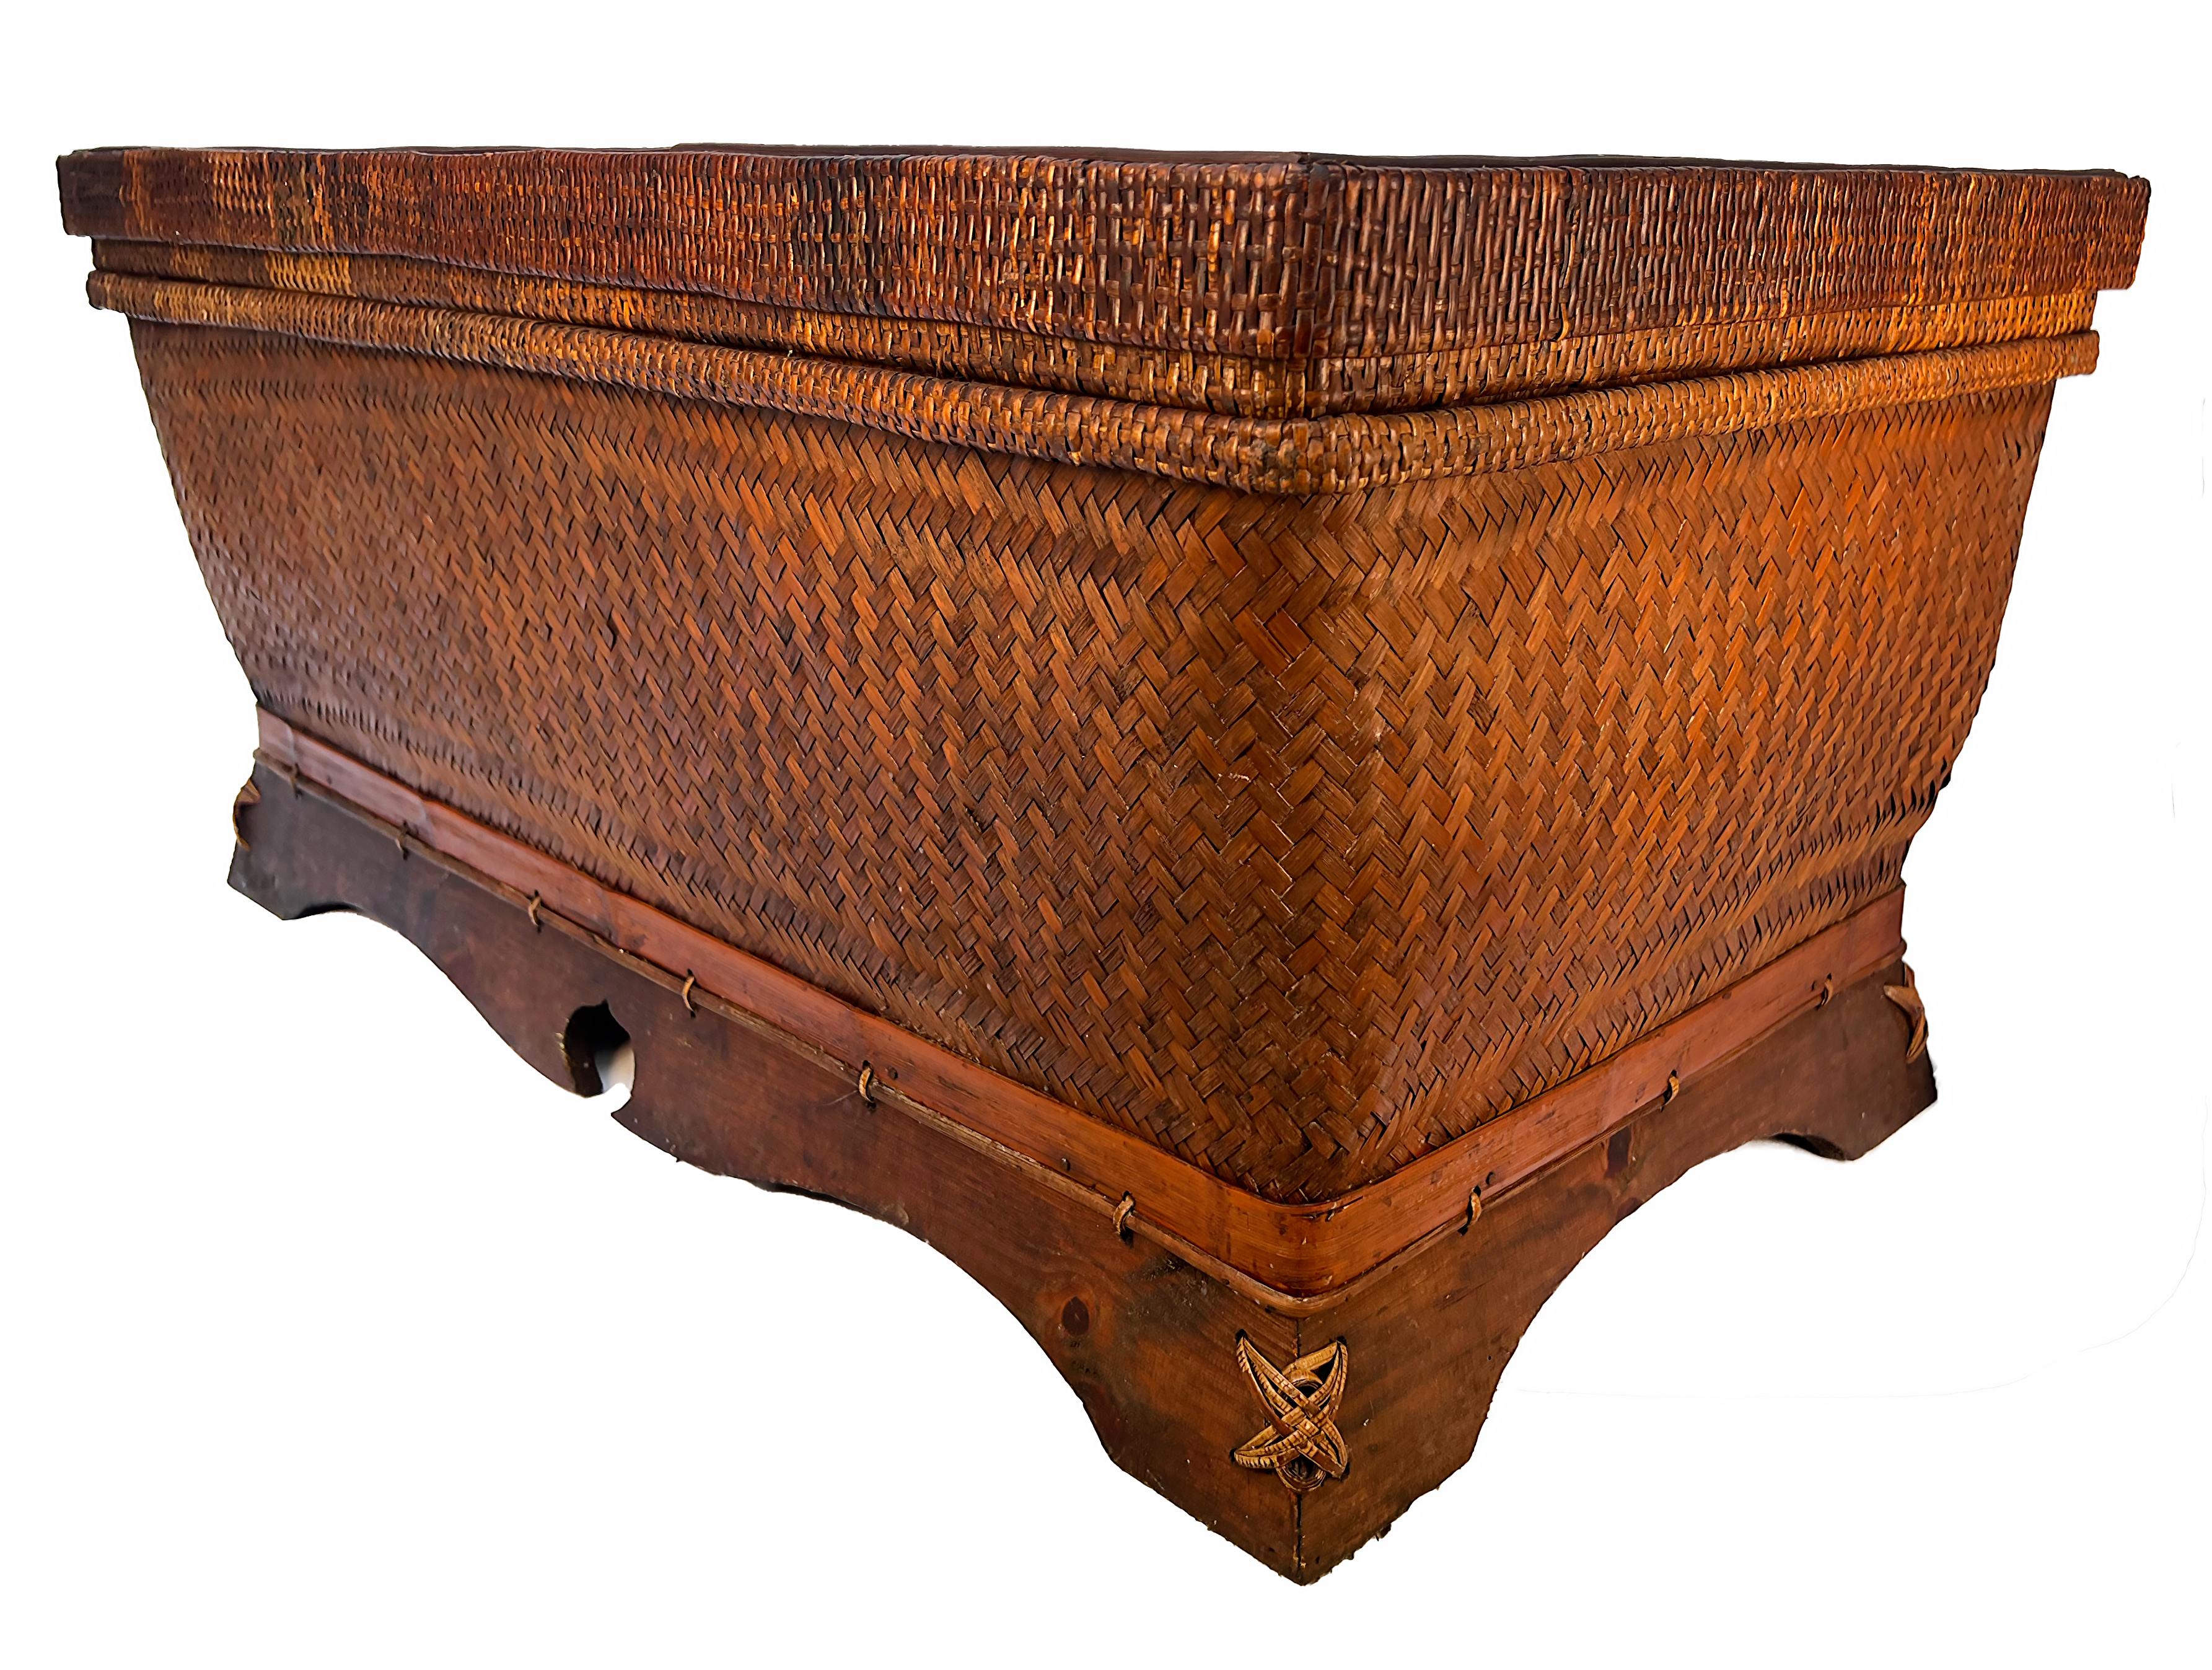 Hand-Woven Antique Chinese Woven Rattan Chest Trunk or Coffee Table  For Sale